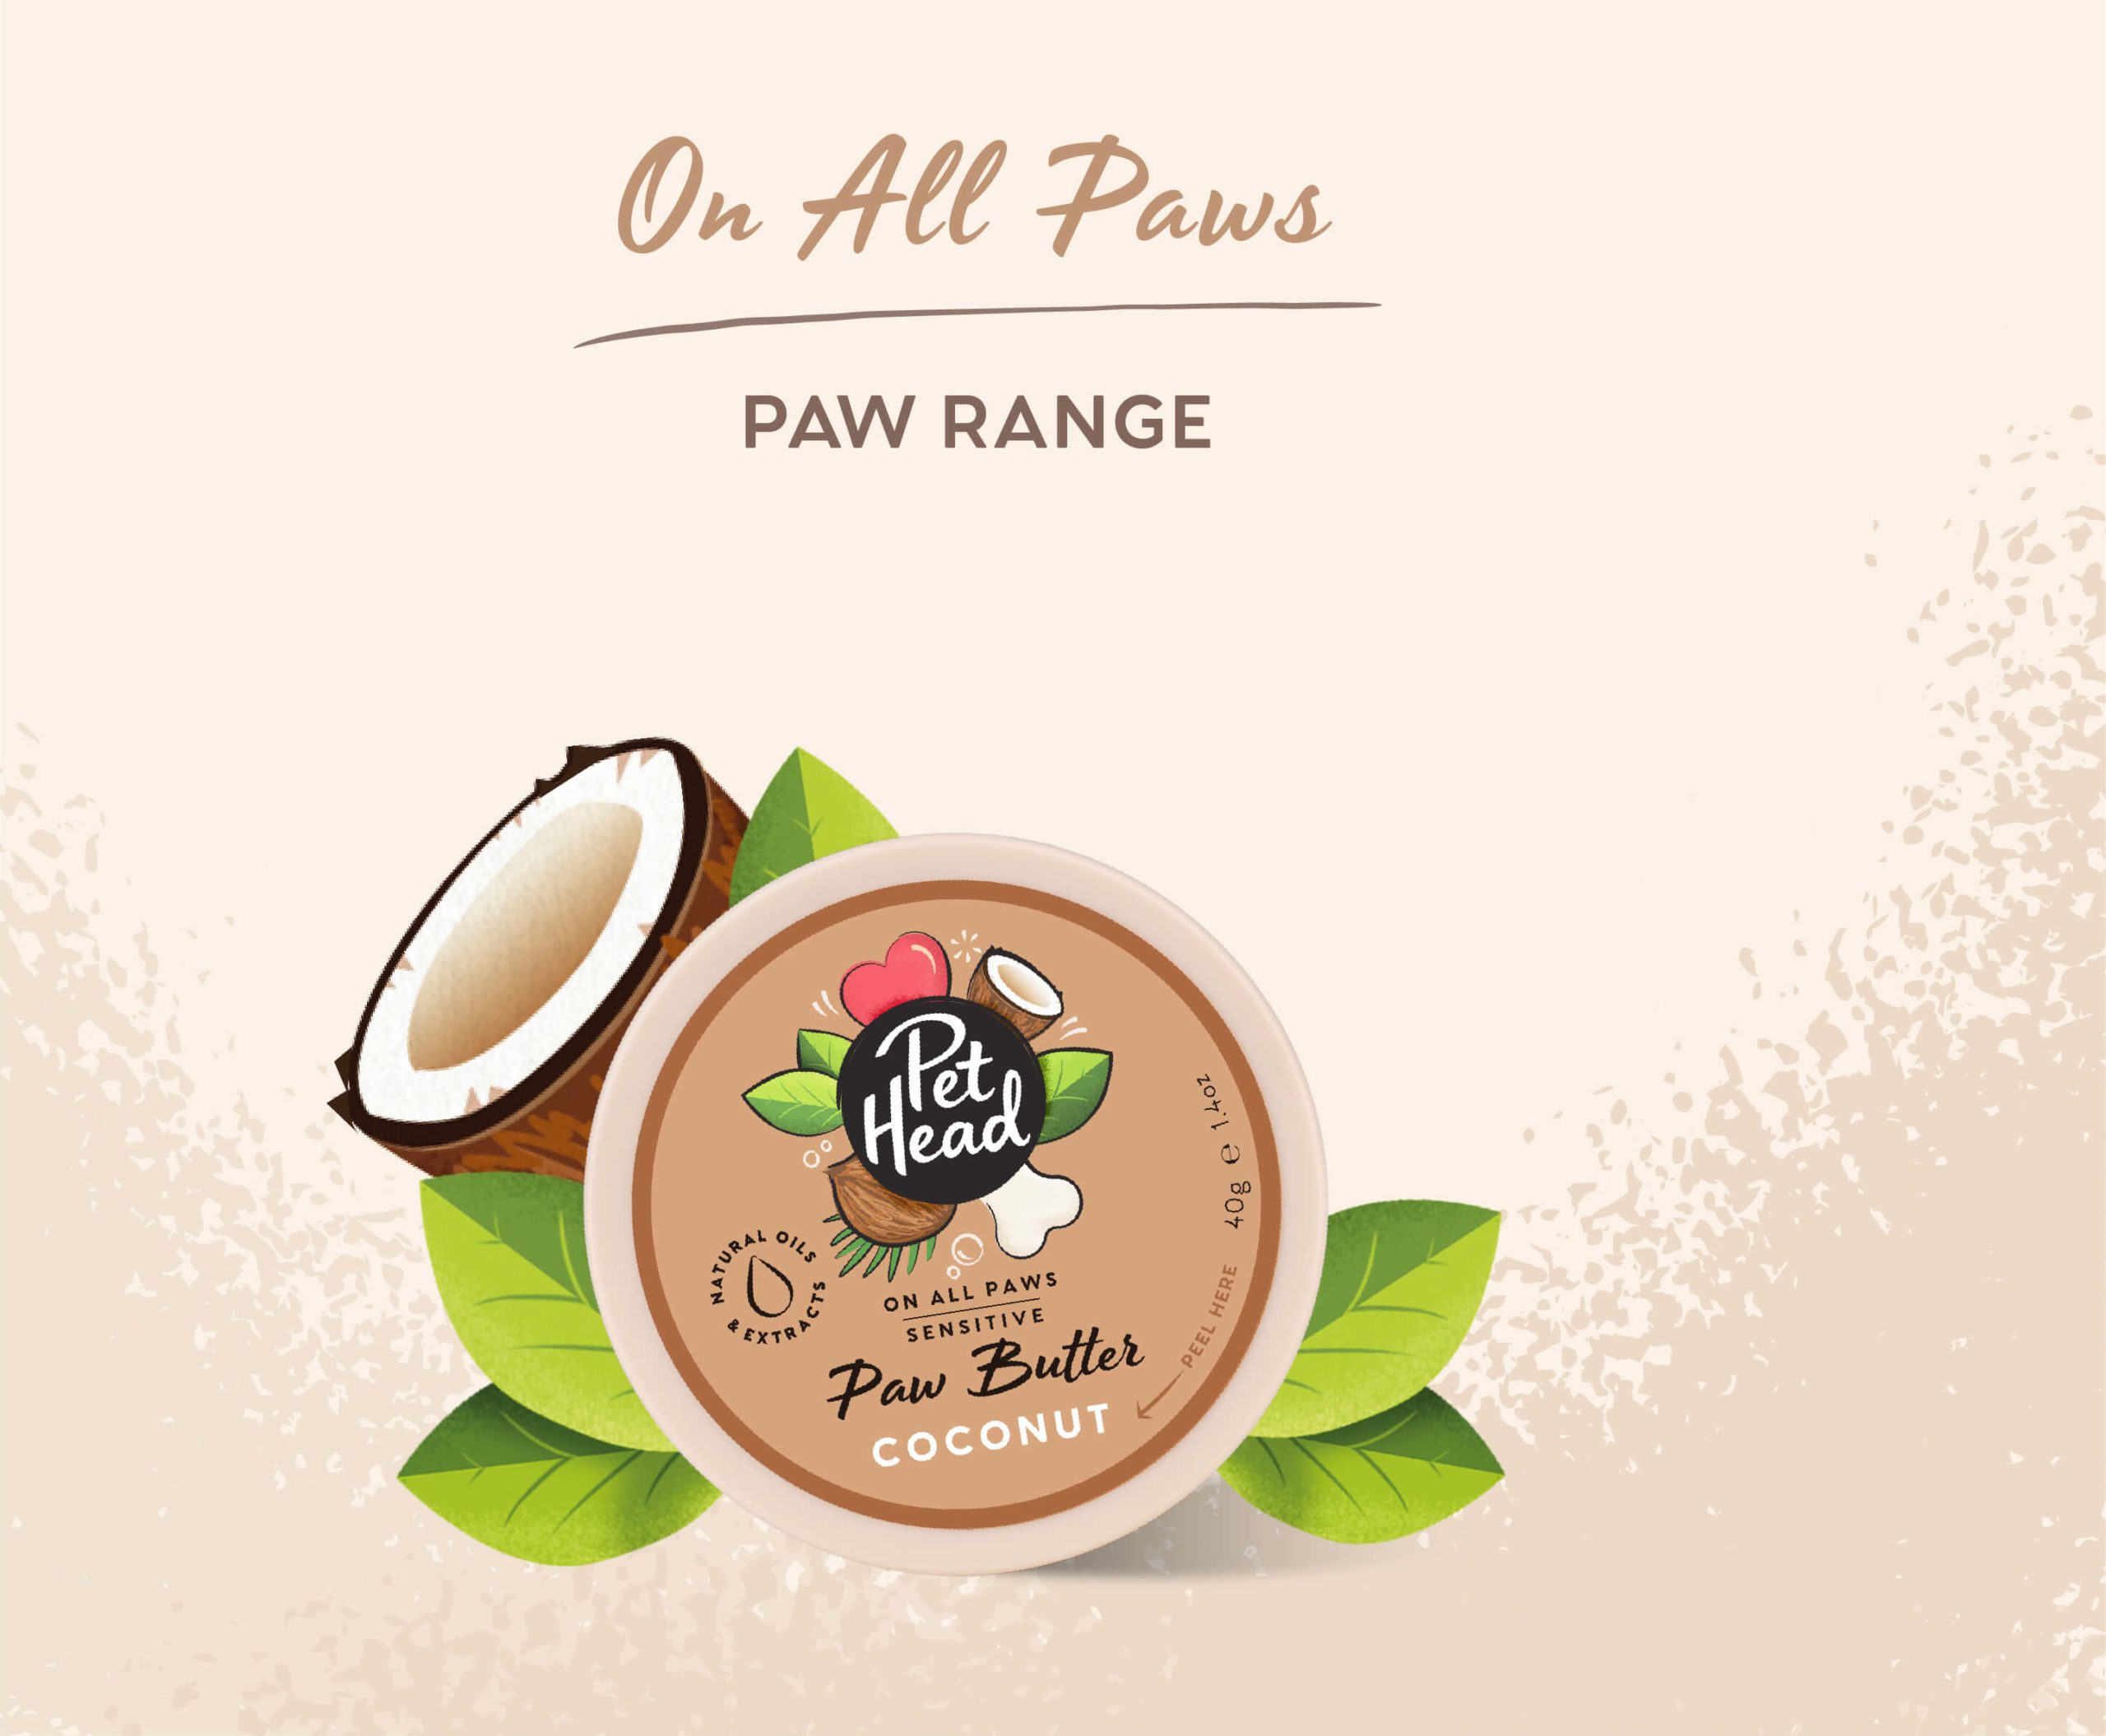 On all Paws Paw Butter tub Lid image